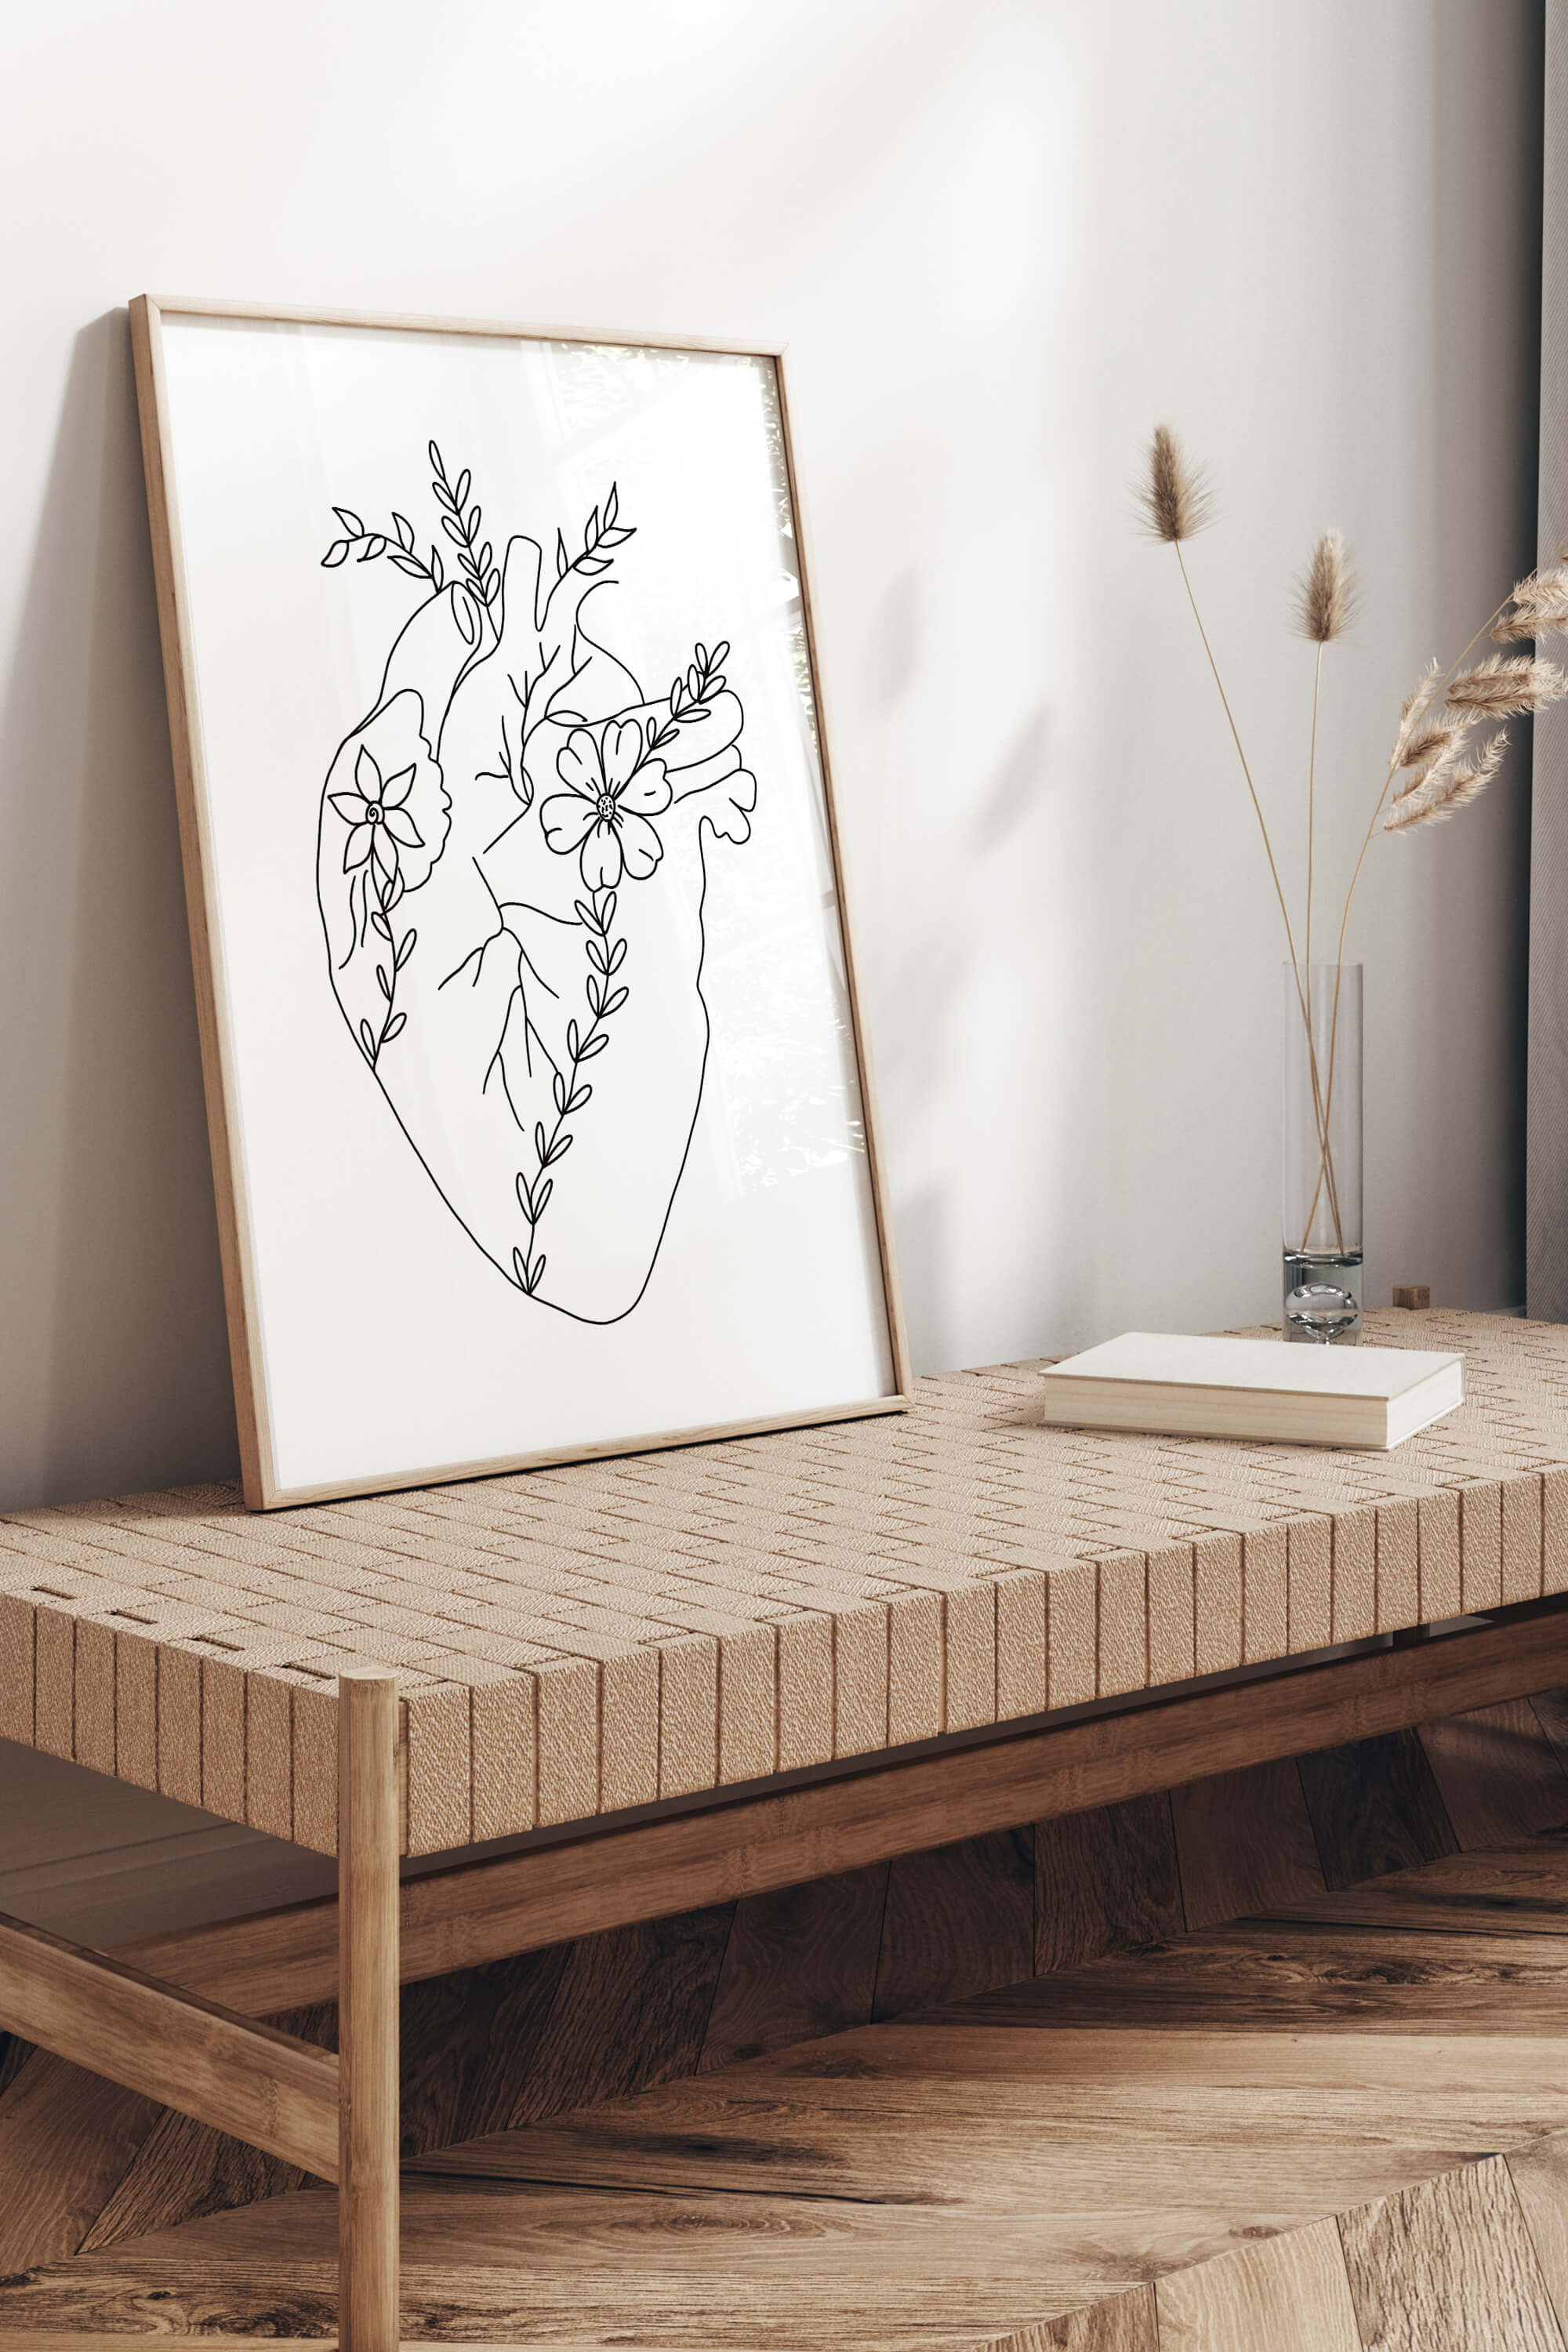 Limited edition floral heart print - Exclusivity meets elegance in this monochrome heart art, a unique addition to refined art collections.